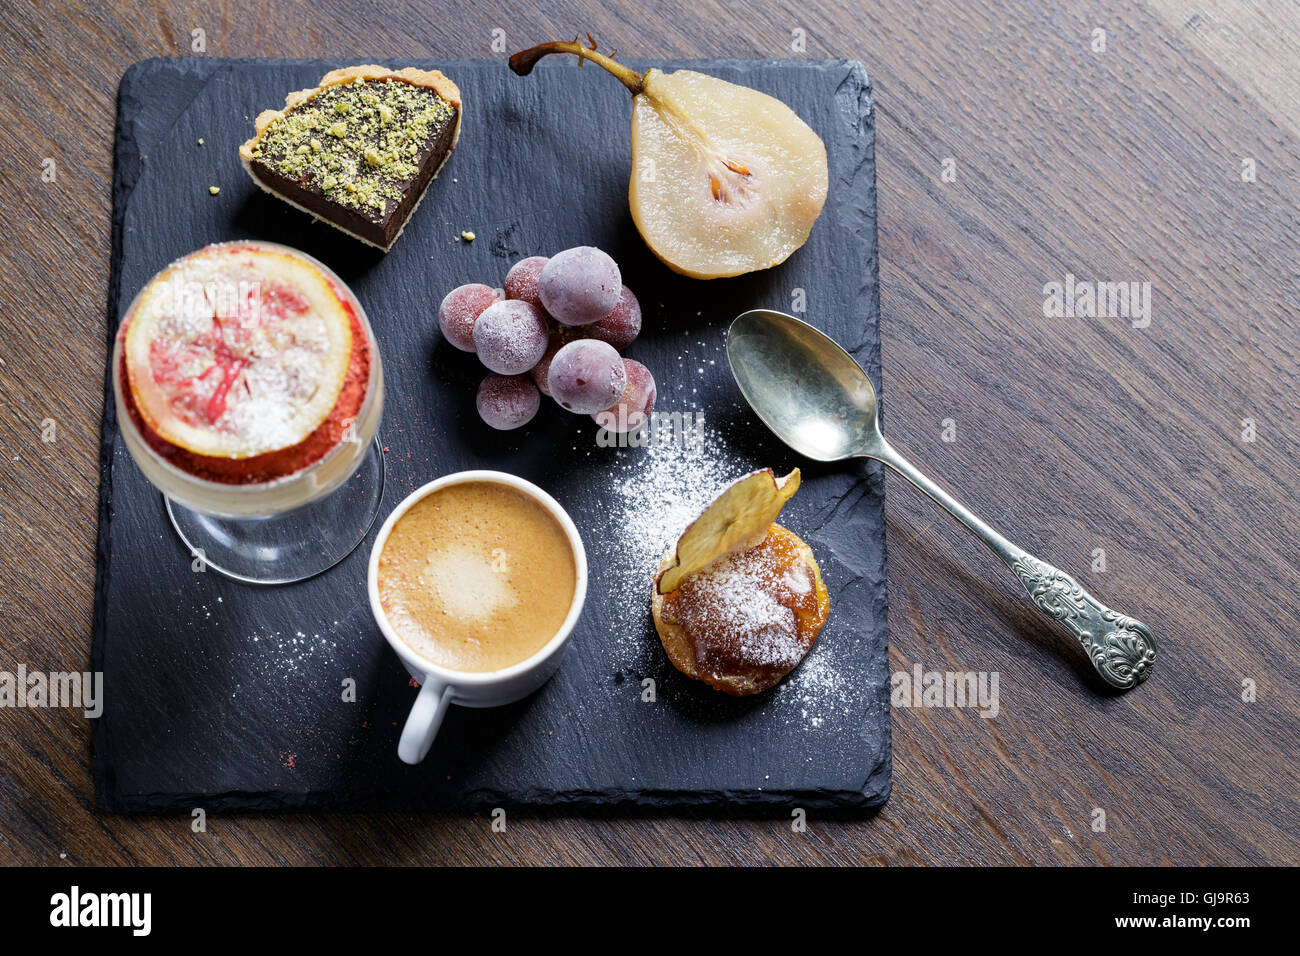 Mix of desserts including espresso coffee served on a slate plate Stock Photo